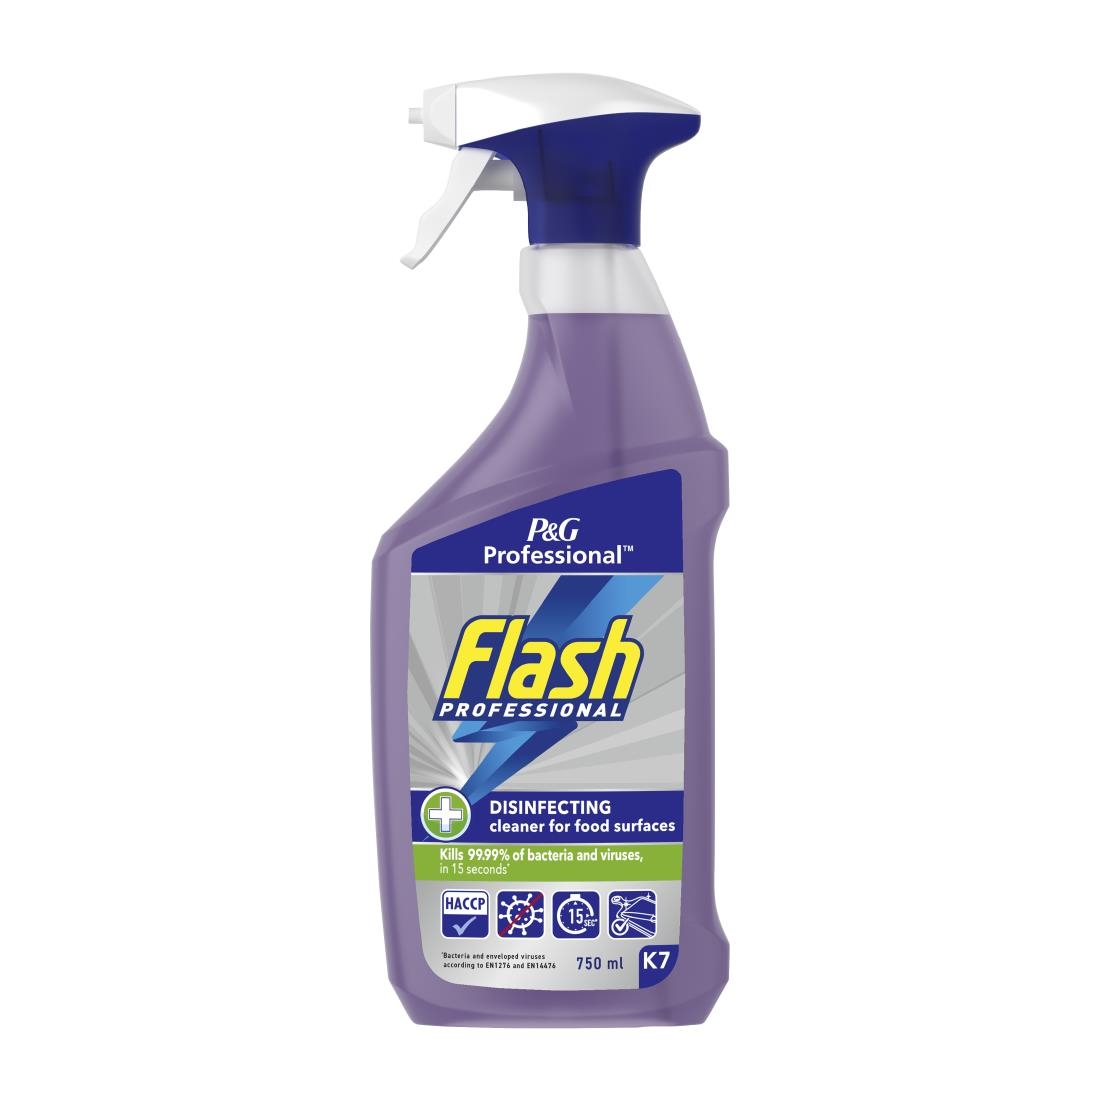 Flash Professional Disinfecting Cleaning Spray for Food Surfaces 750ml Pack of 6 (DX563)